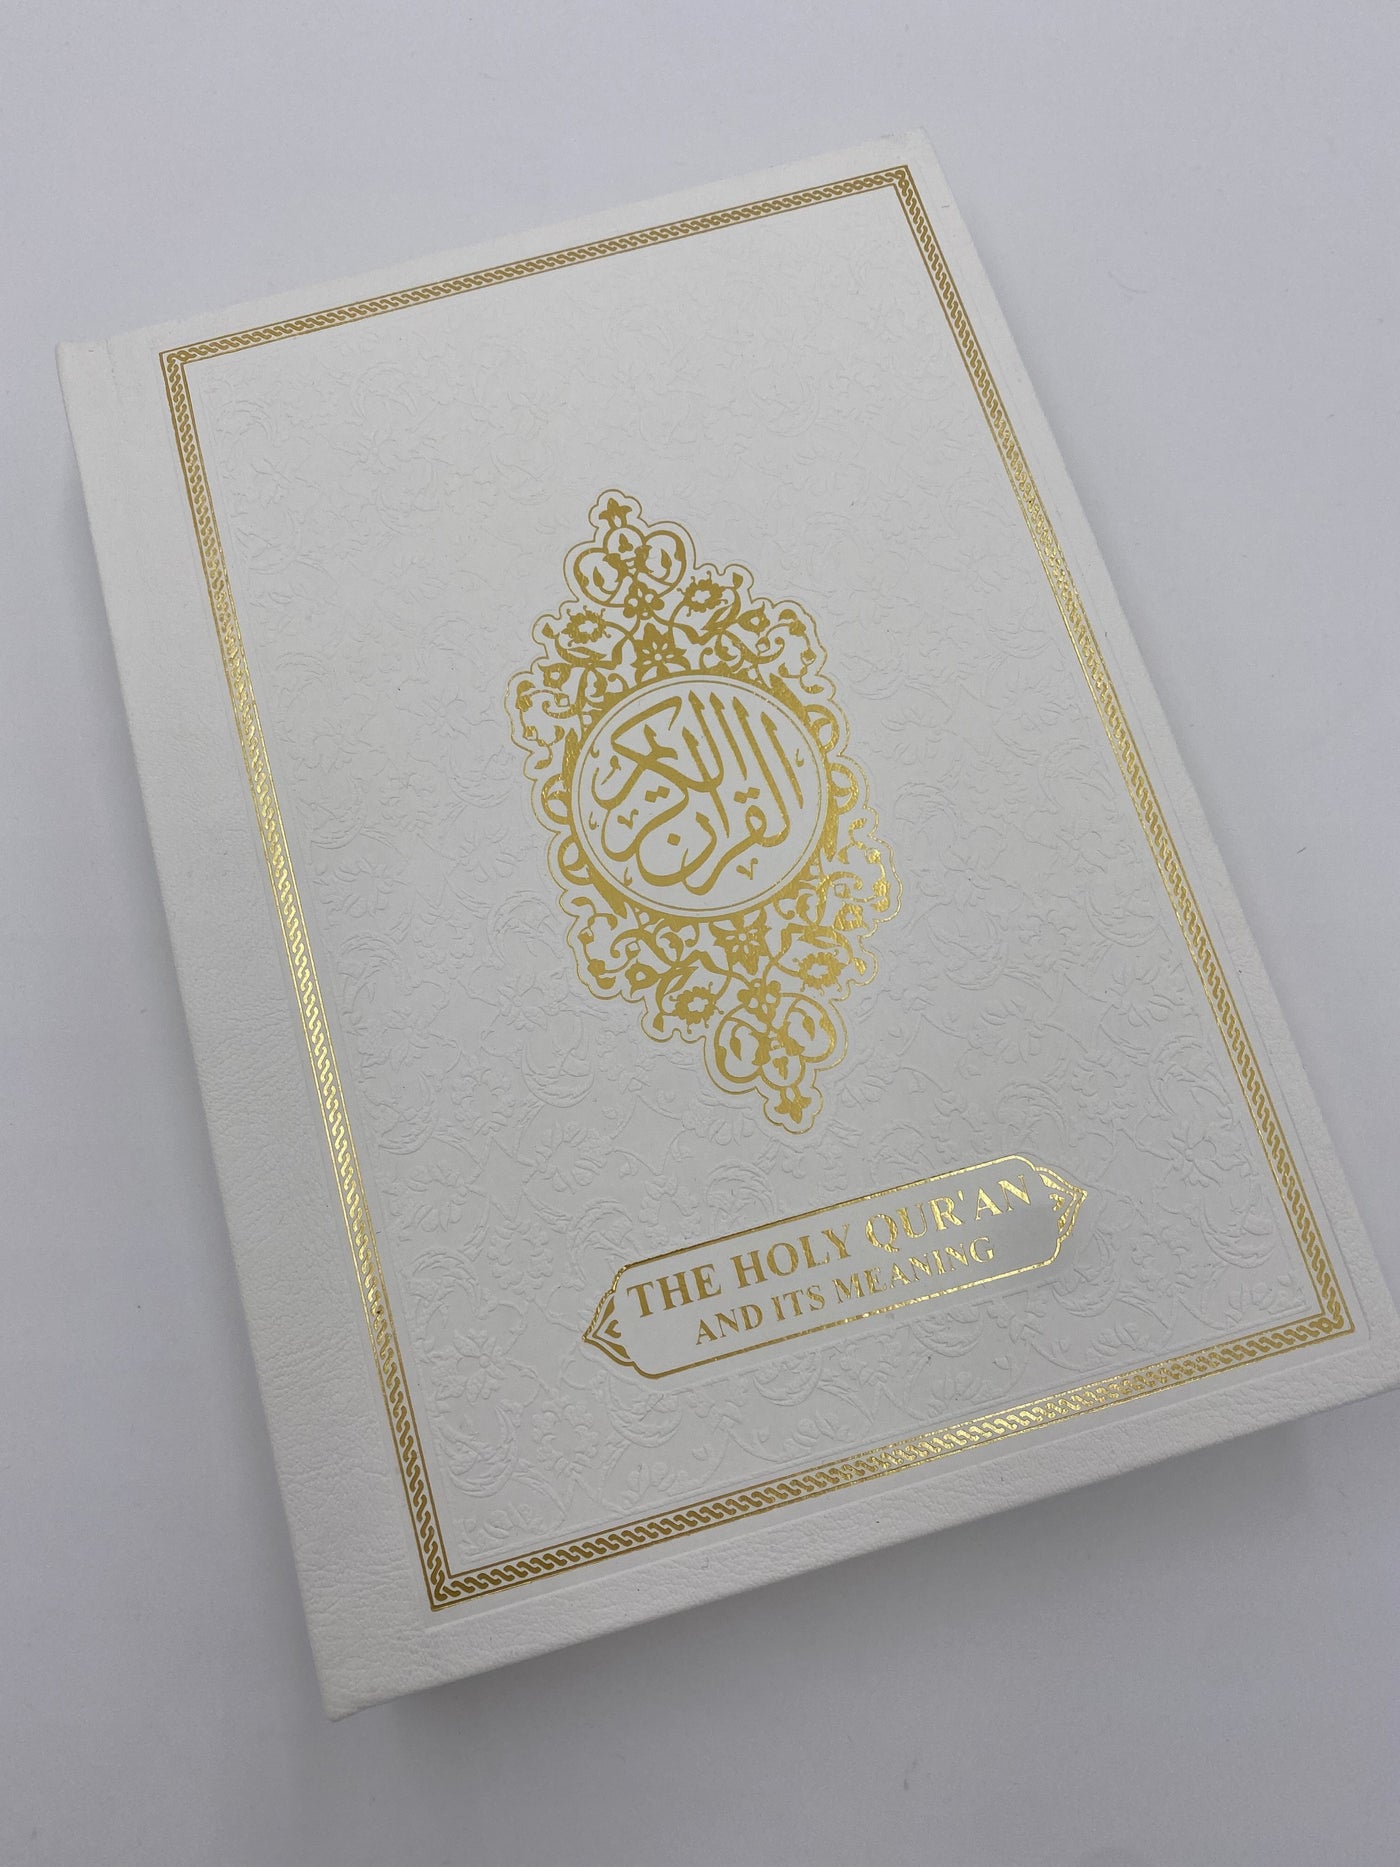 The Noble QUR'AN (WHITE)